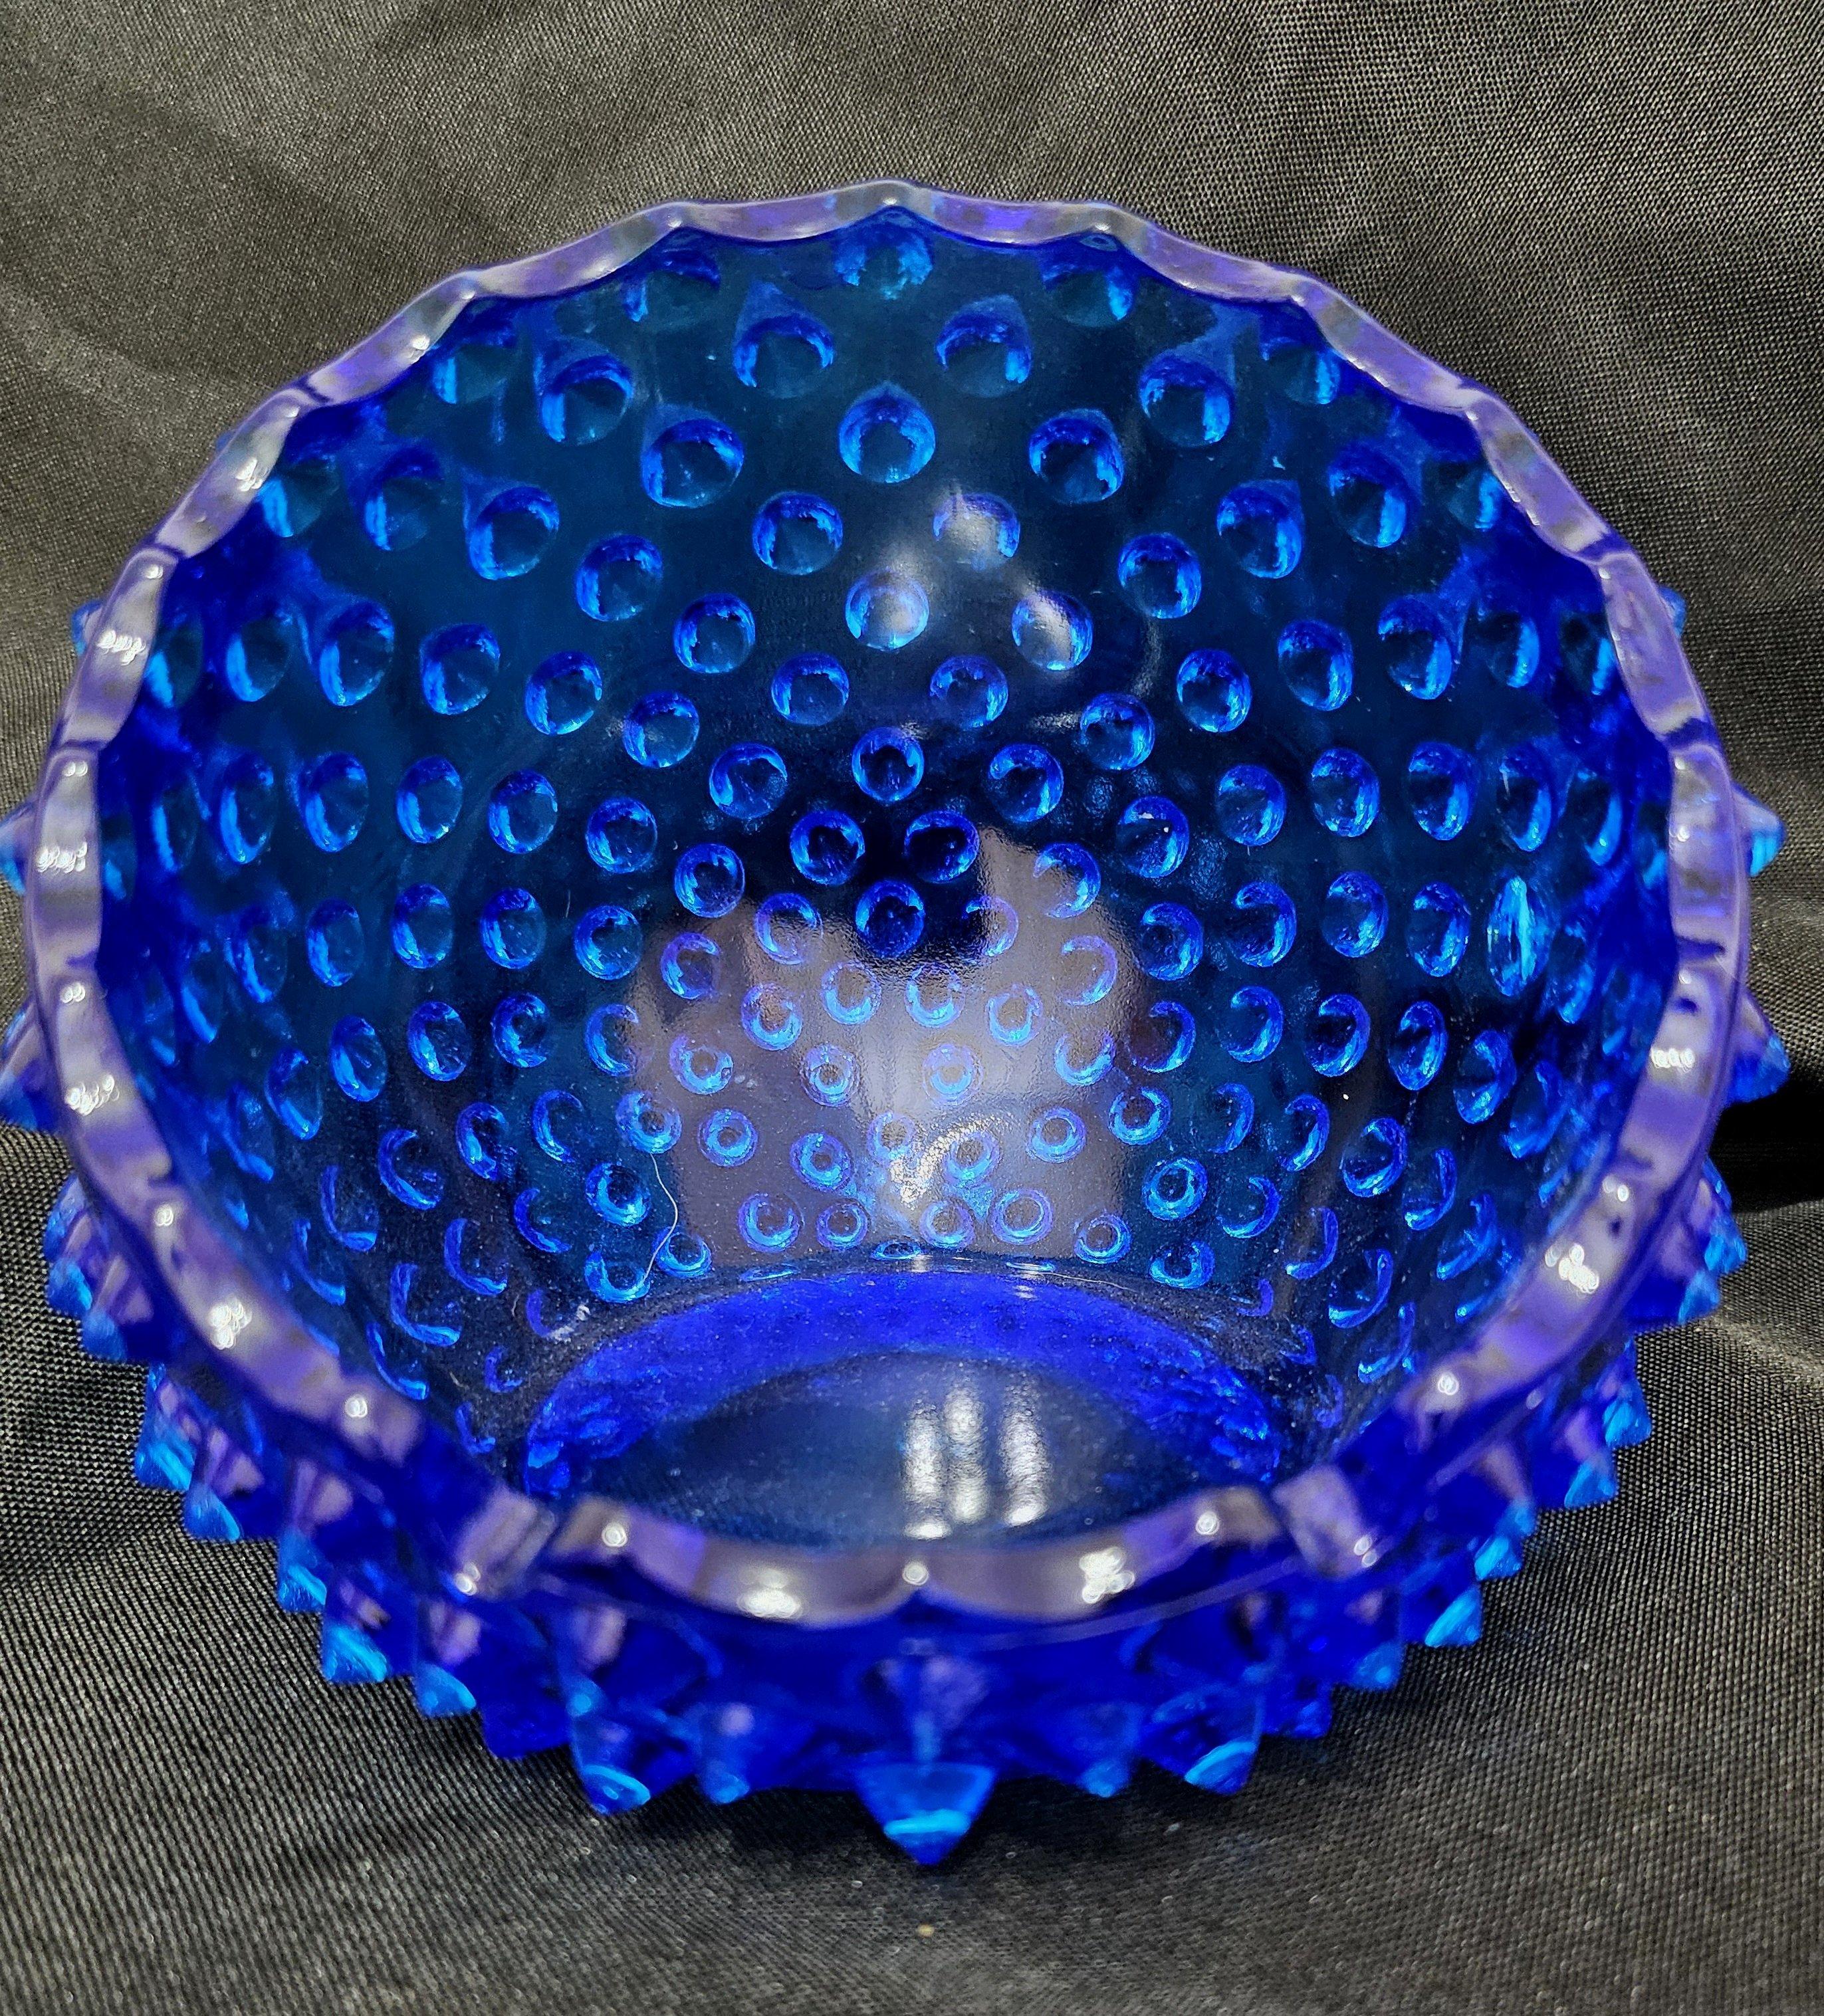 Vintage Fenton Royal Blue Hobnail Orb, Ball-Shaped Ashtray / Bowl / Vessel In Good Condition For Sale In Warrenton, OR